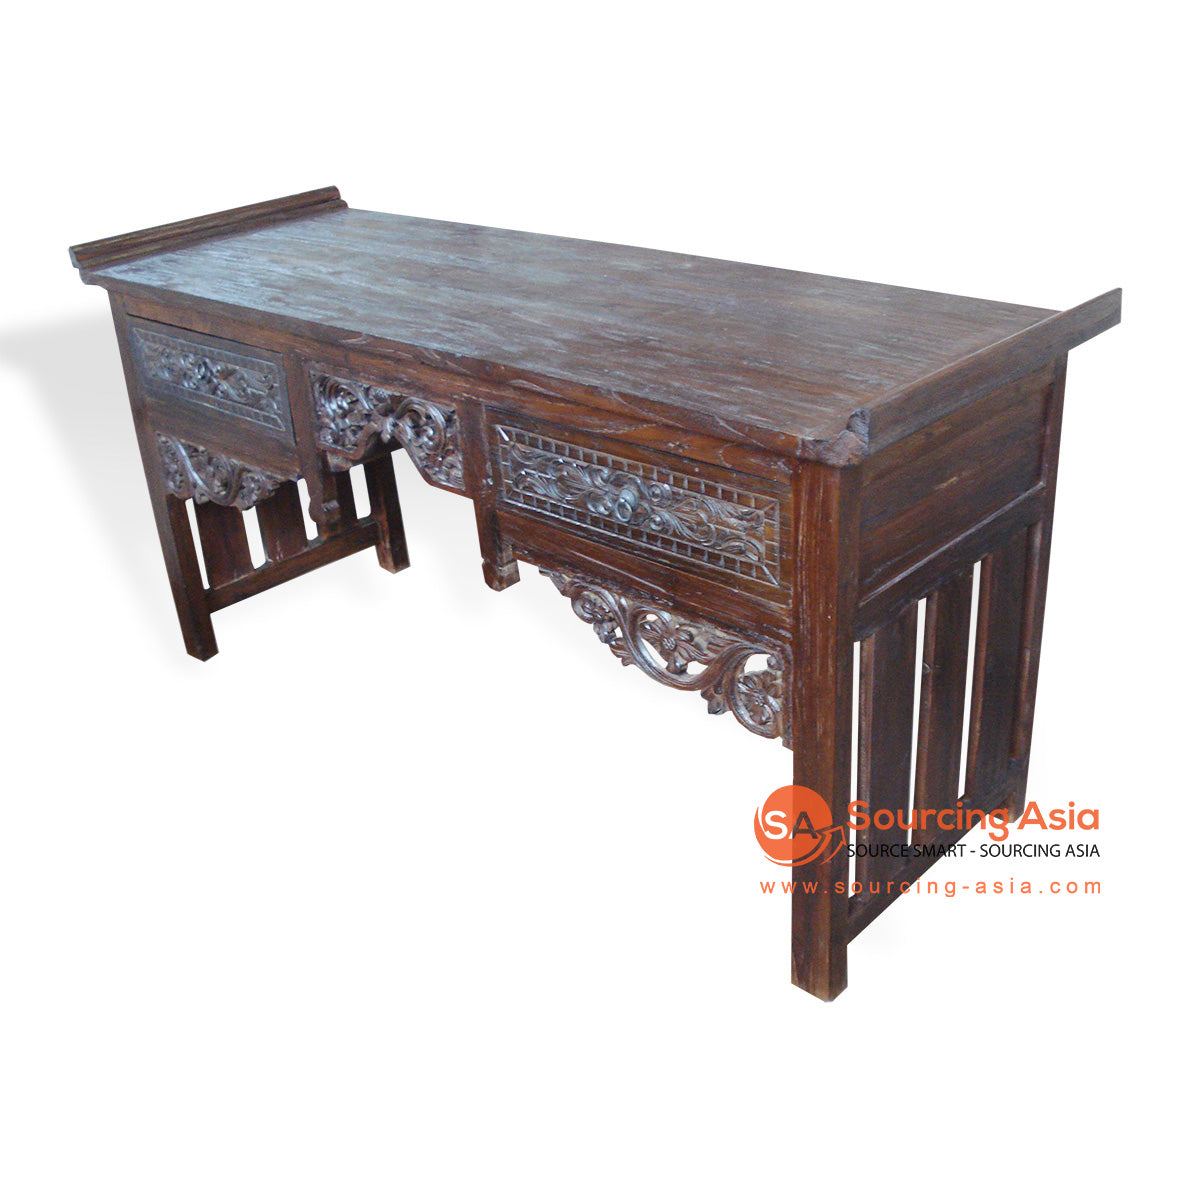 TRG196 SALAK BROWN RECYCLED TEAK WOOD SINGLE DRAWER CARVED CONSOLE